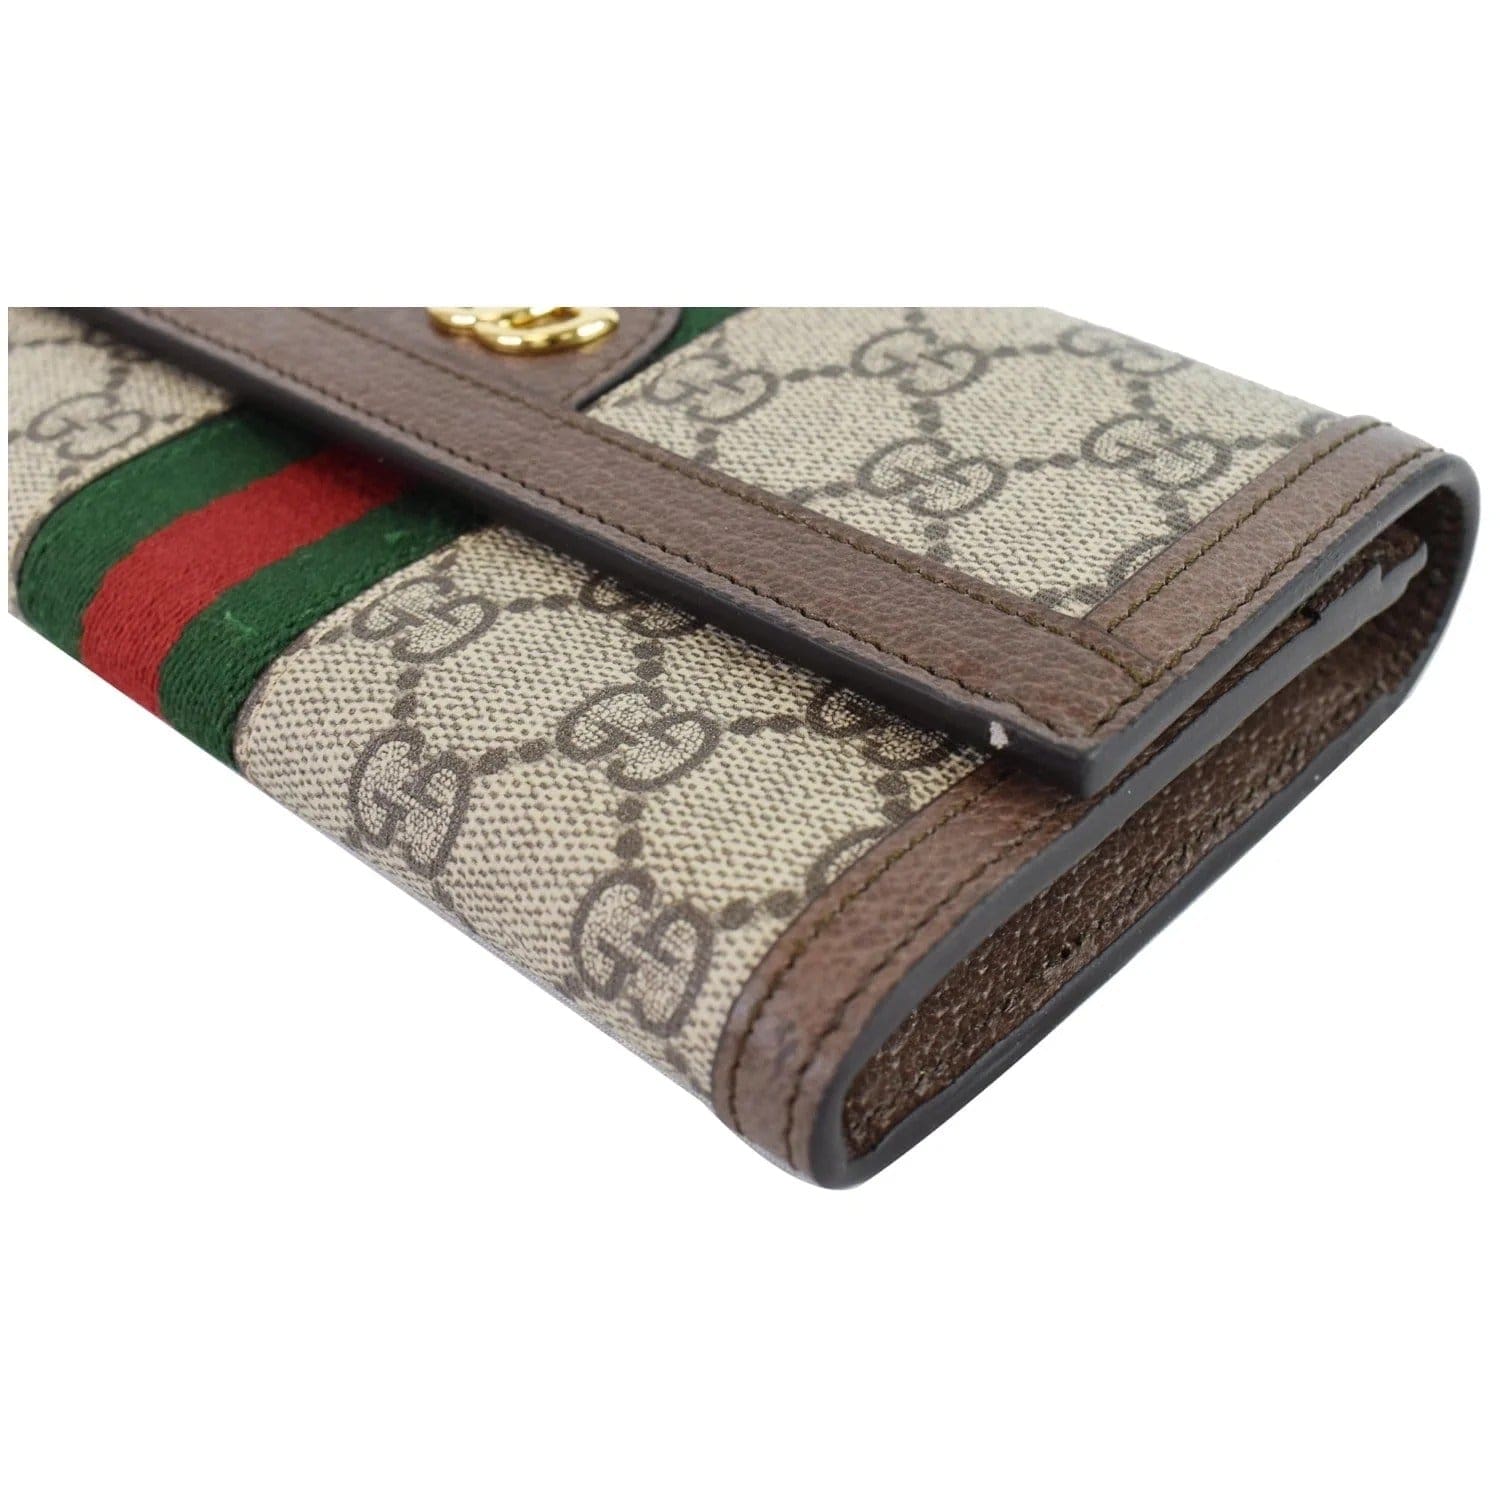 523153 Wallet OPHIDIA Continental Zip Around Card Case Holder 523154  Designer Womens Business Cardholder Coin Purse Key Pouch Cles Passport  Cover 523155 523159 From Jerseyland020, $24.12